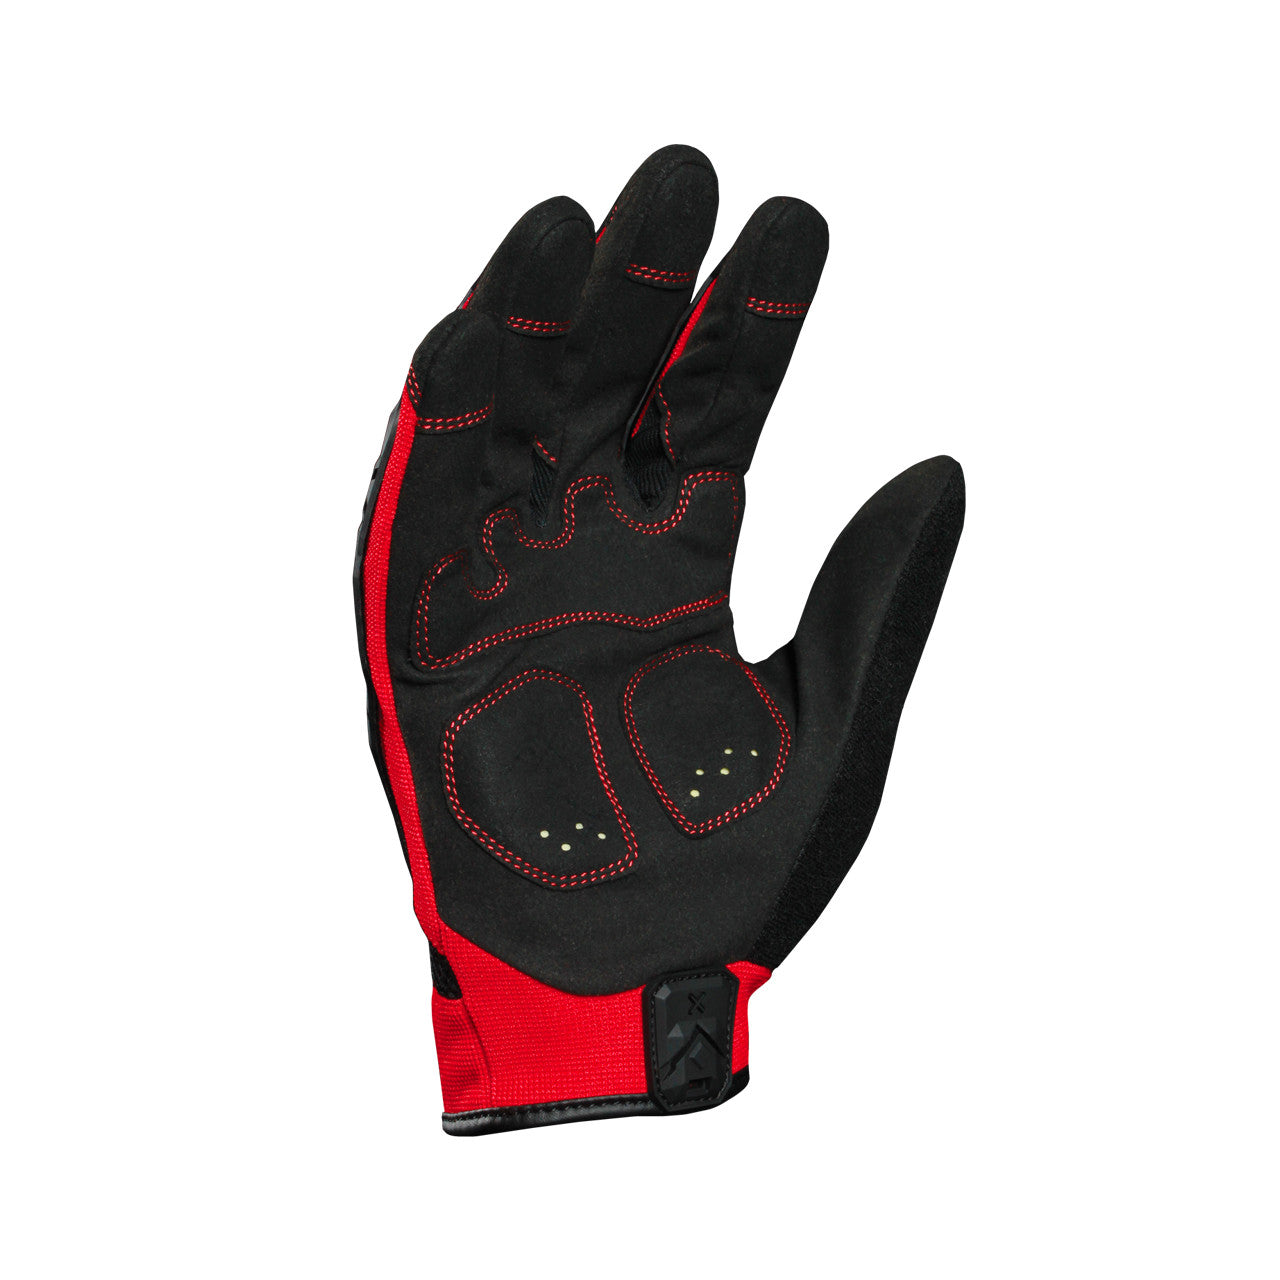 Ironclad EXO™ Impact Glove Black/Red-eSafety Supplies, Inc